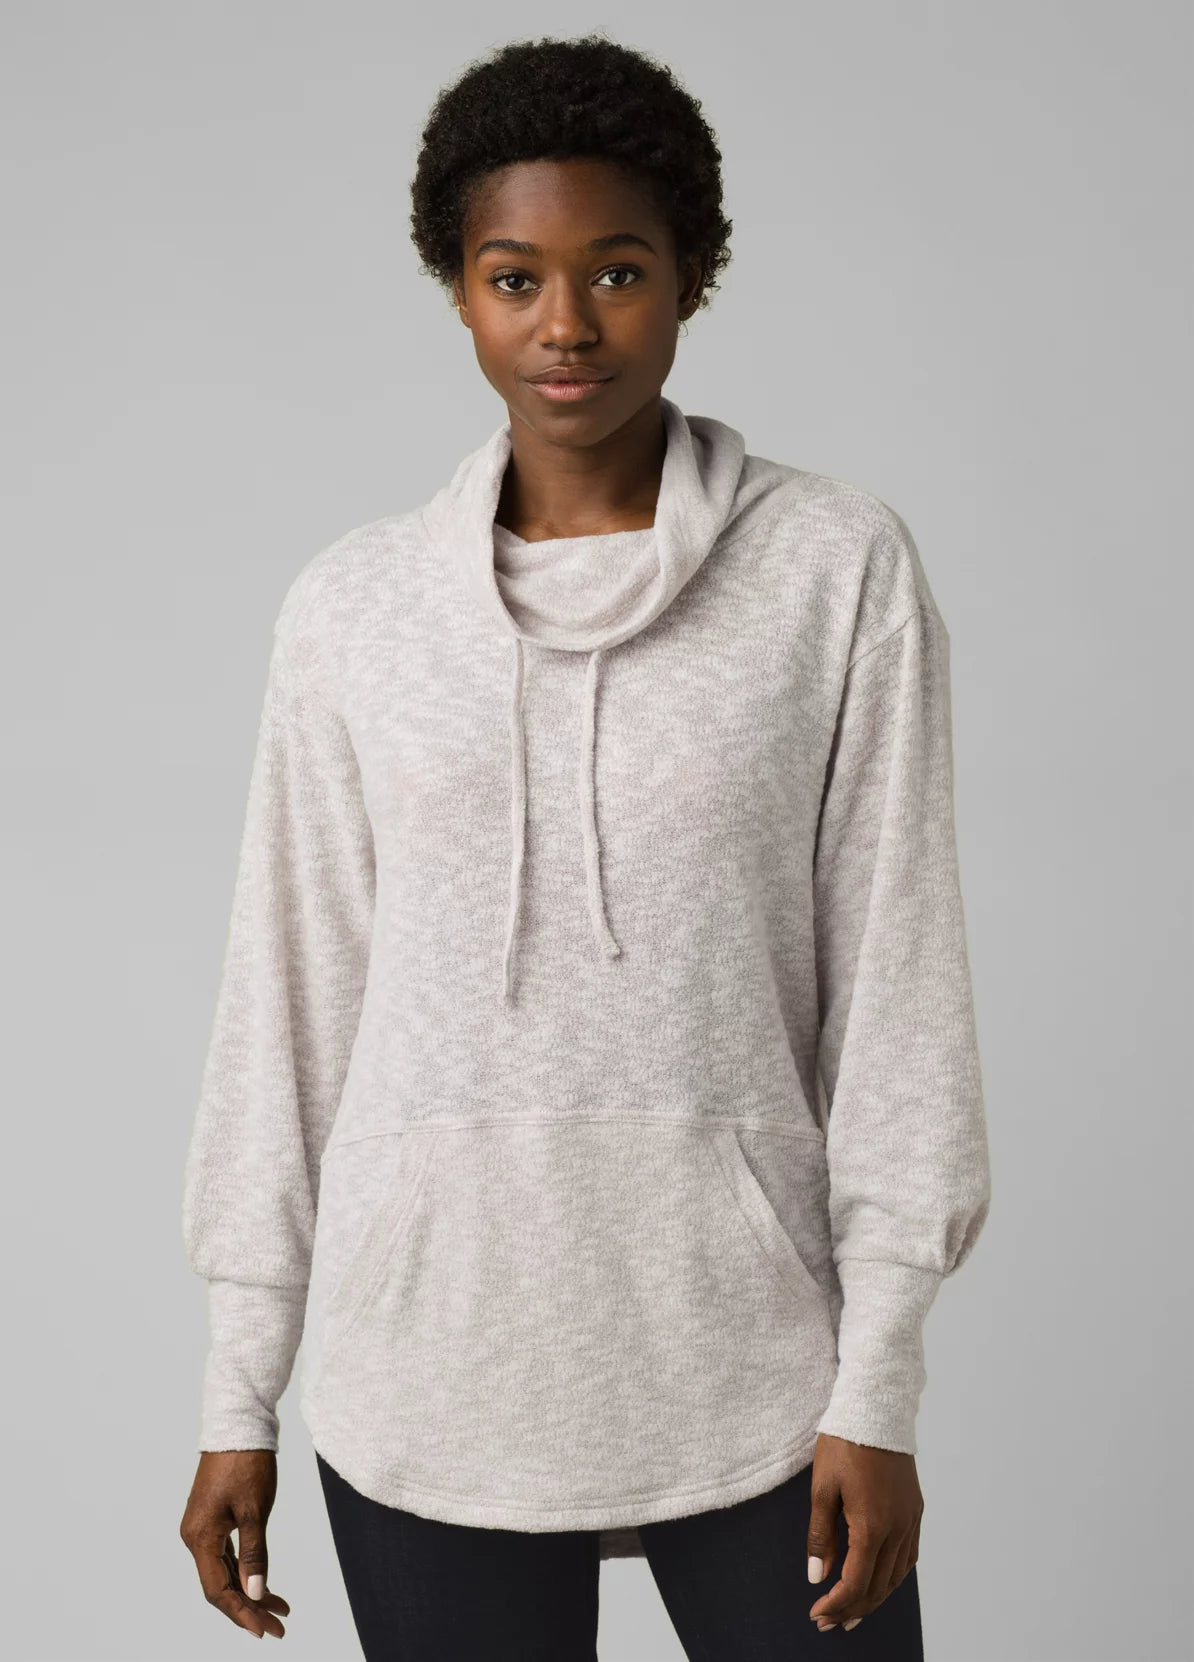 Prana - Hooded T-shirt – One Tooth Guelph